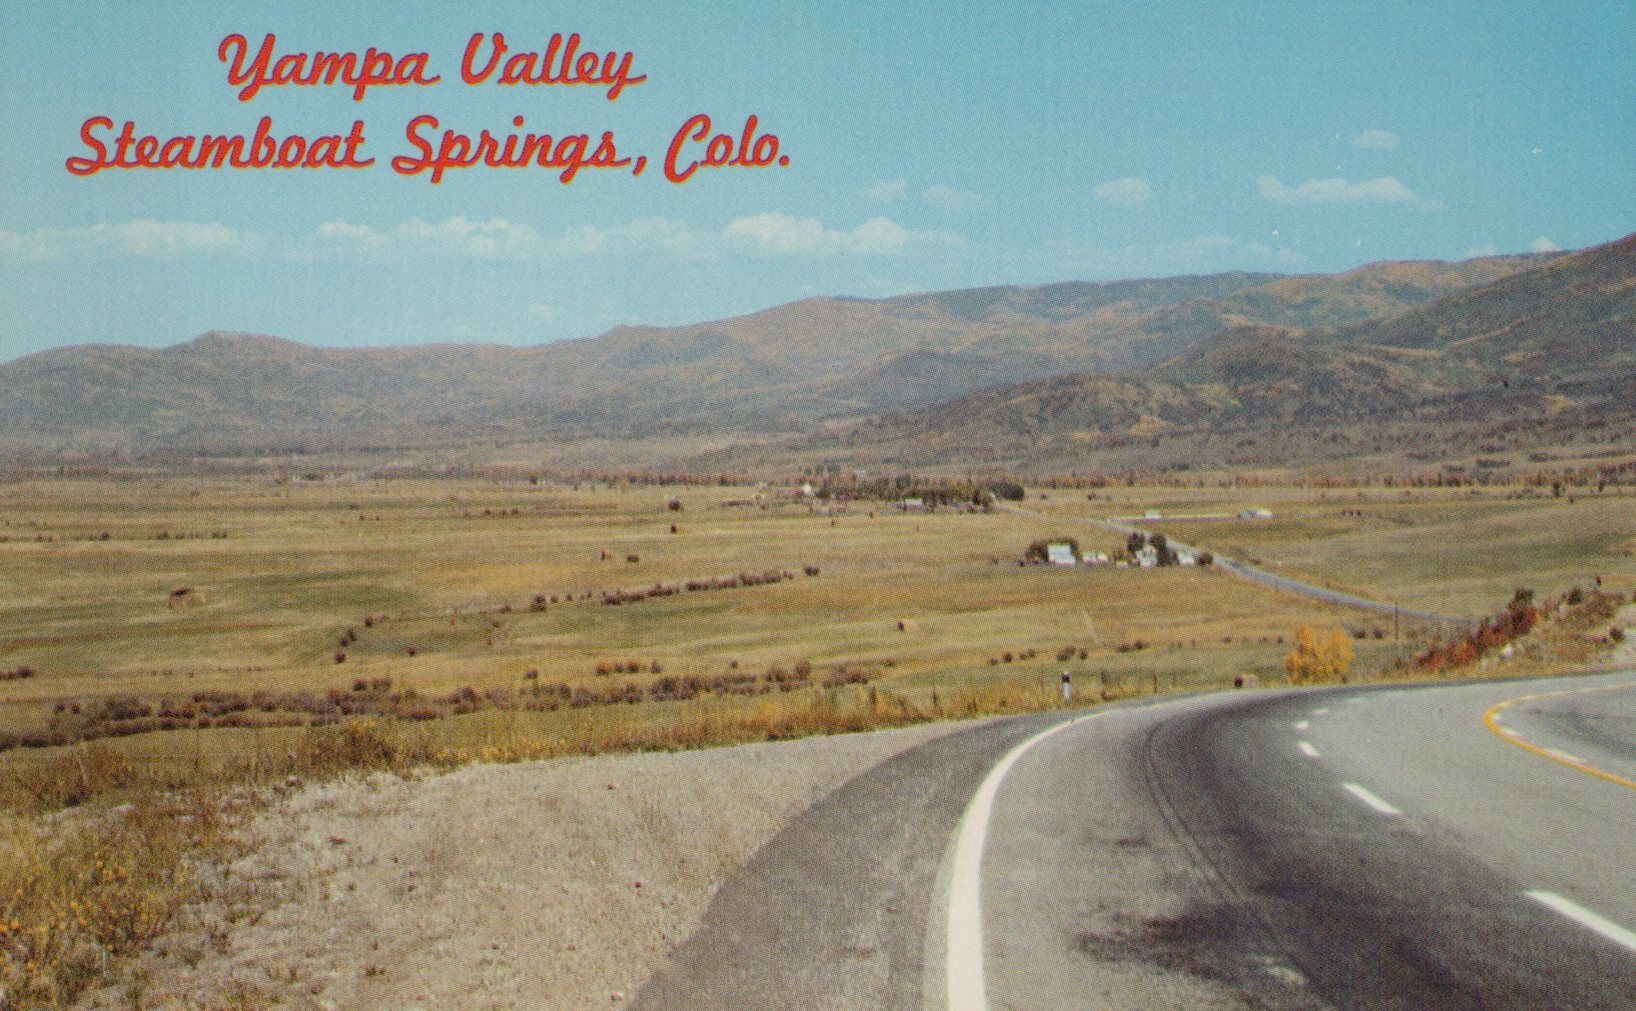 Yampa Valley, Steamboat Springs, Co.